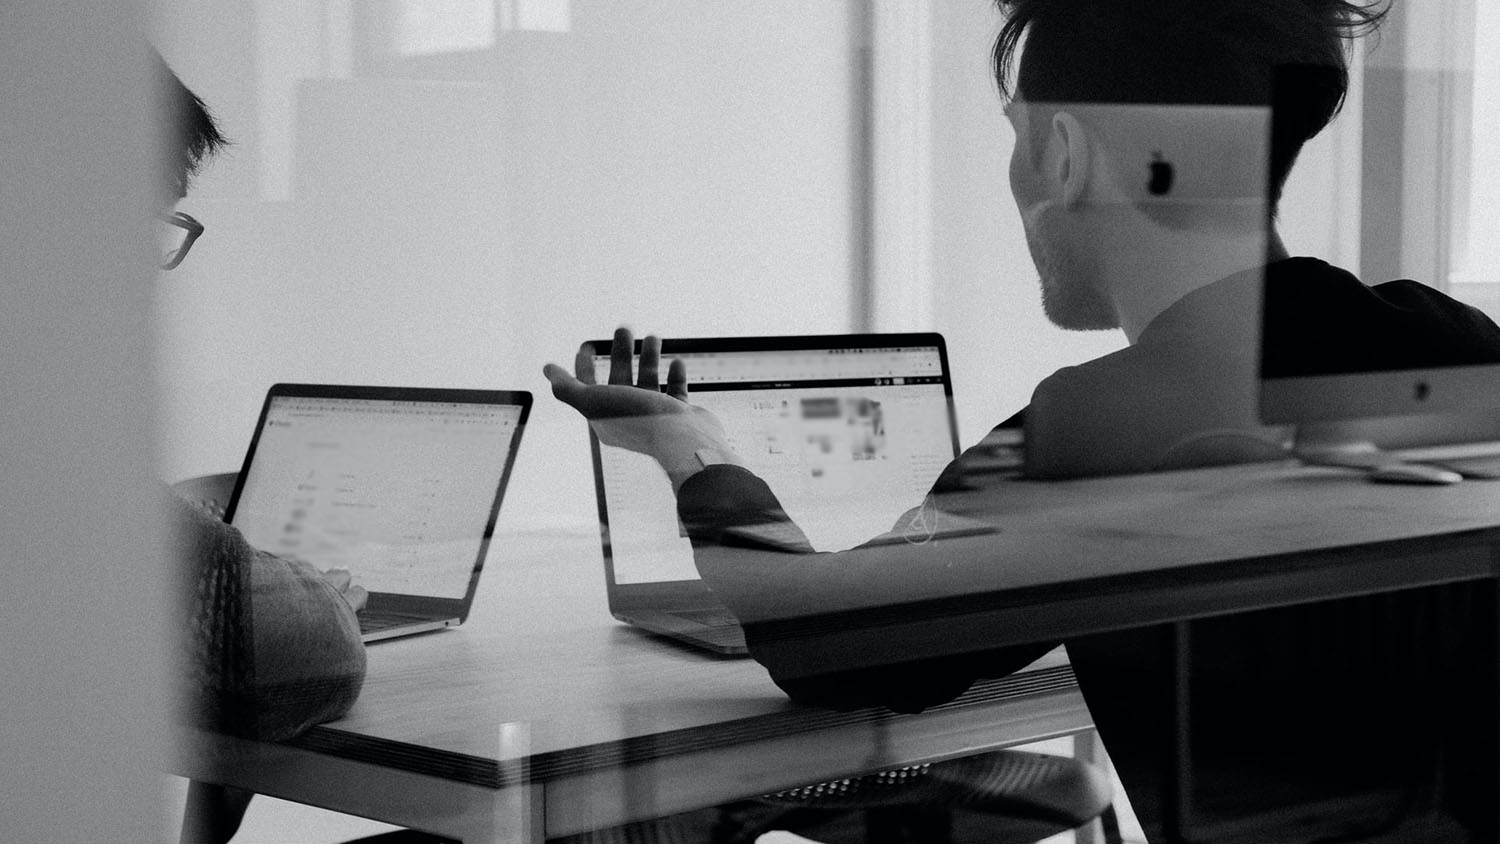 Black and white photo of back of two people engaged in conversation while seated in front of laptops.